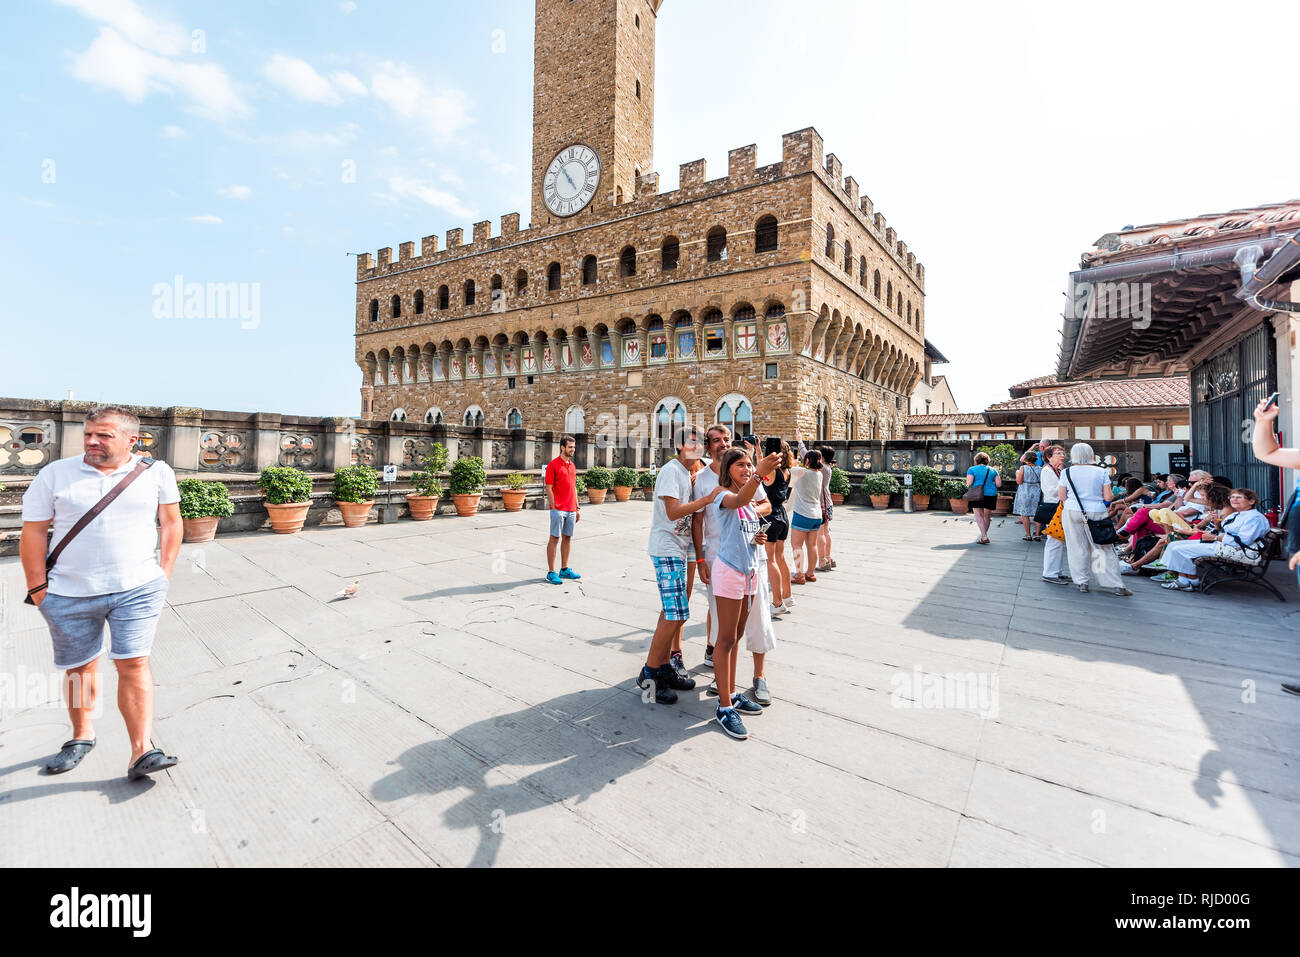 Firenze, Italy - August 30, 2018: Many people by cafe on rooftop terrace of famous Florence Uffizi art museum gallery with view of old building Palazz Stock Photo